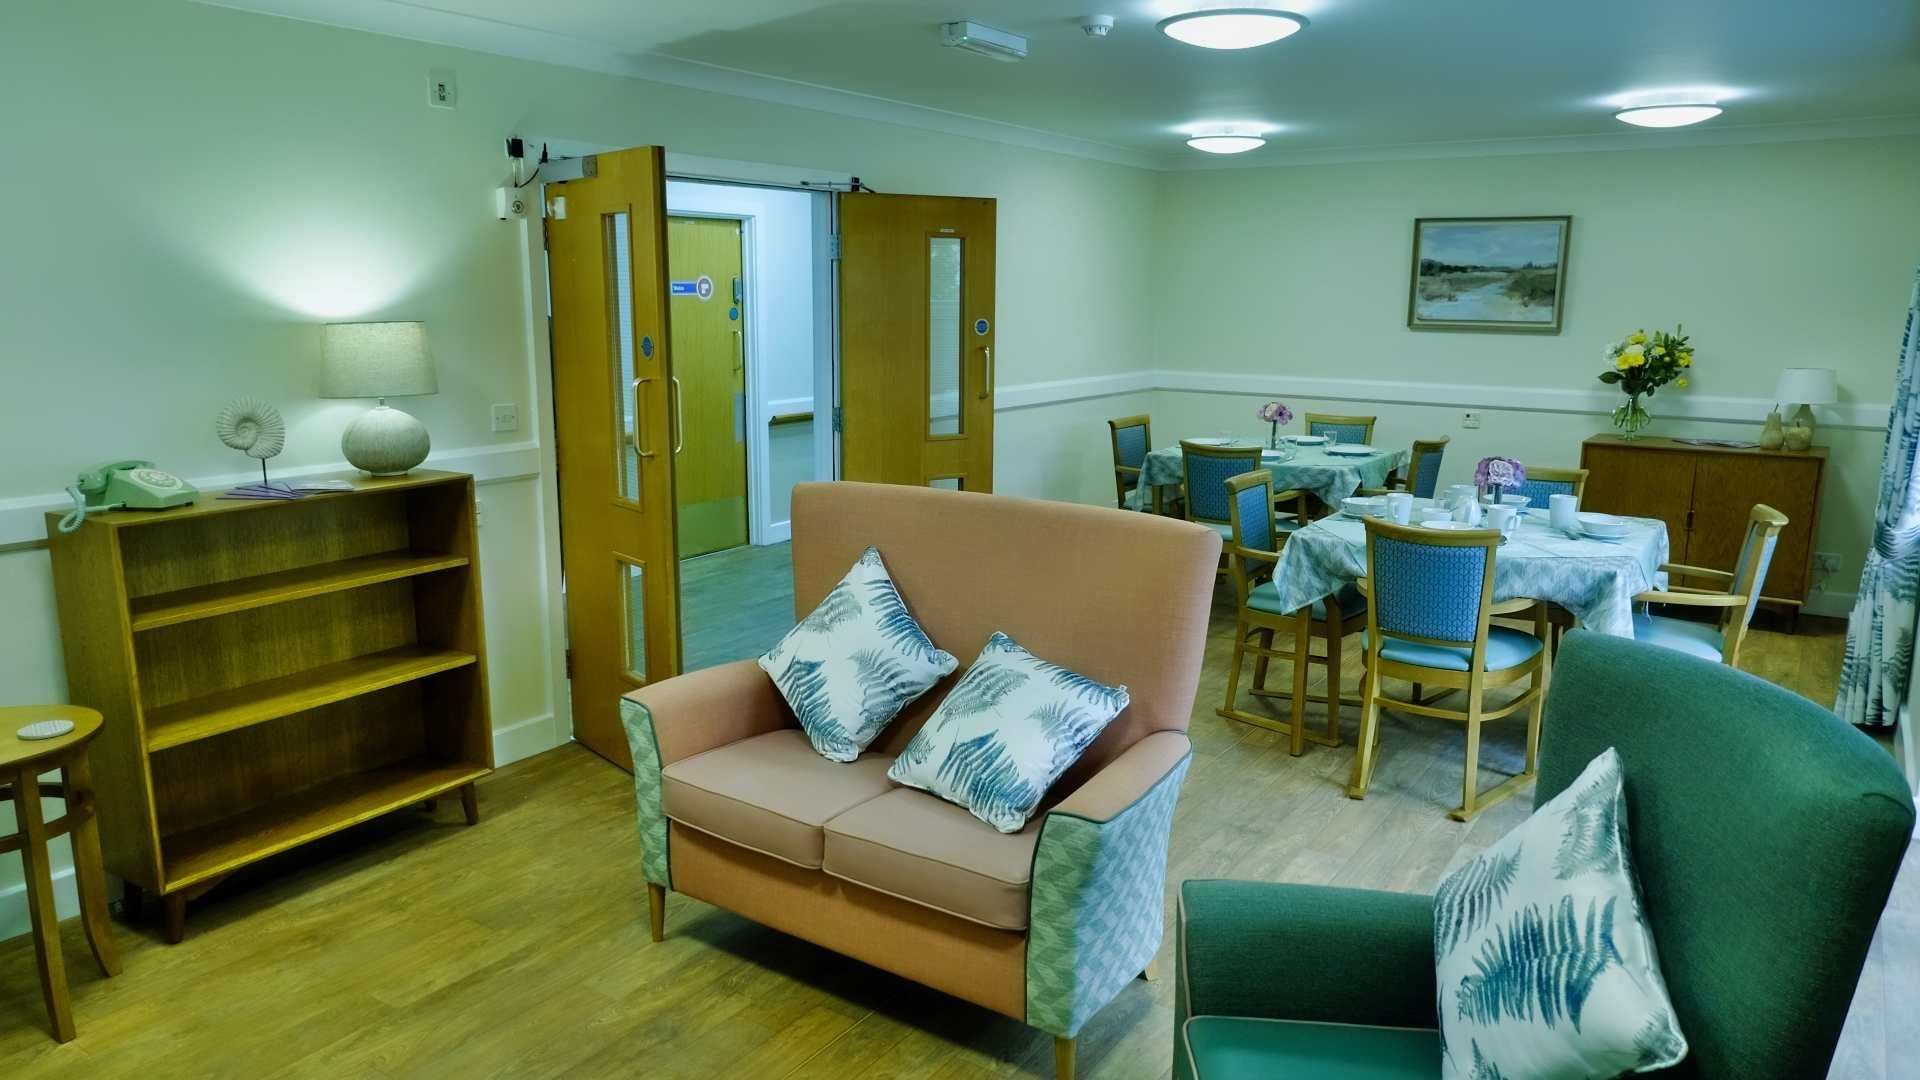 dementia care lounge at paisley lodge